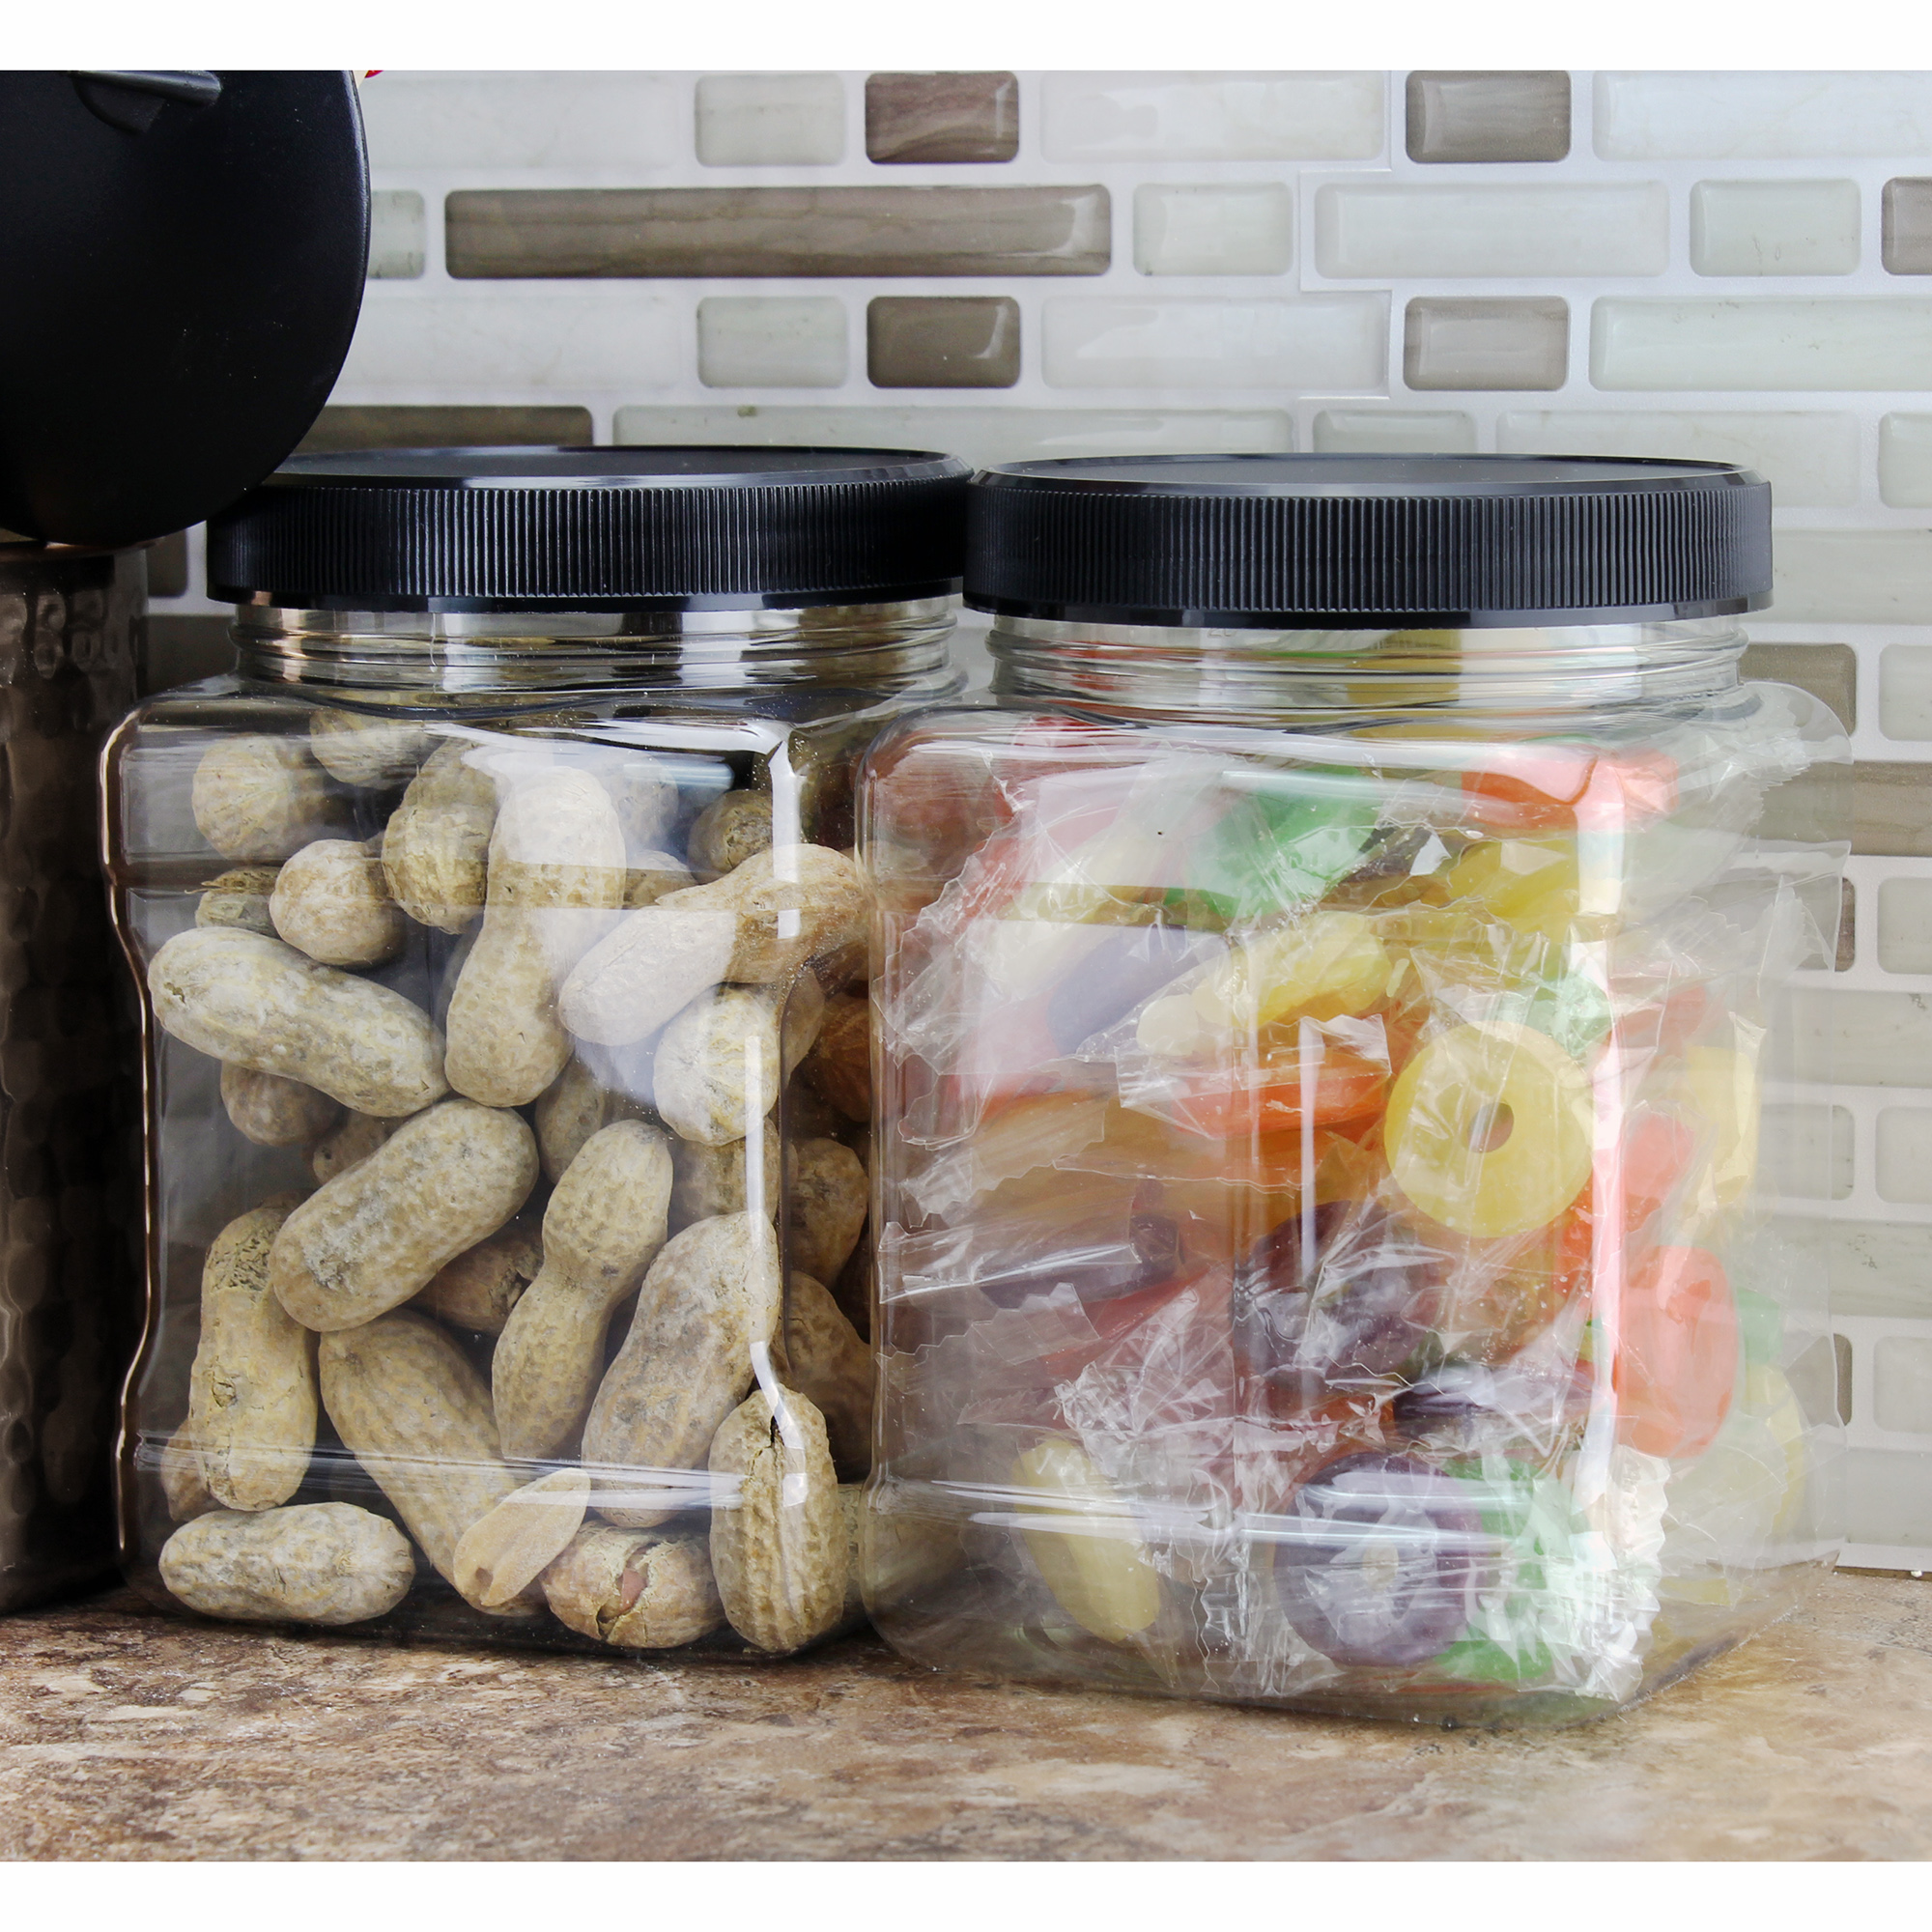 32oz Square Plastic Jars (4-Pack, Quart); Clear Rectangular 4-Cup Canisters w/Black Lids, Easy-Grip Side - image 3 of 6